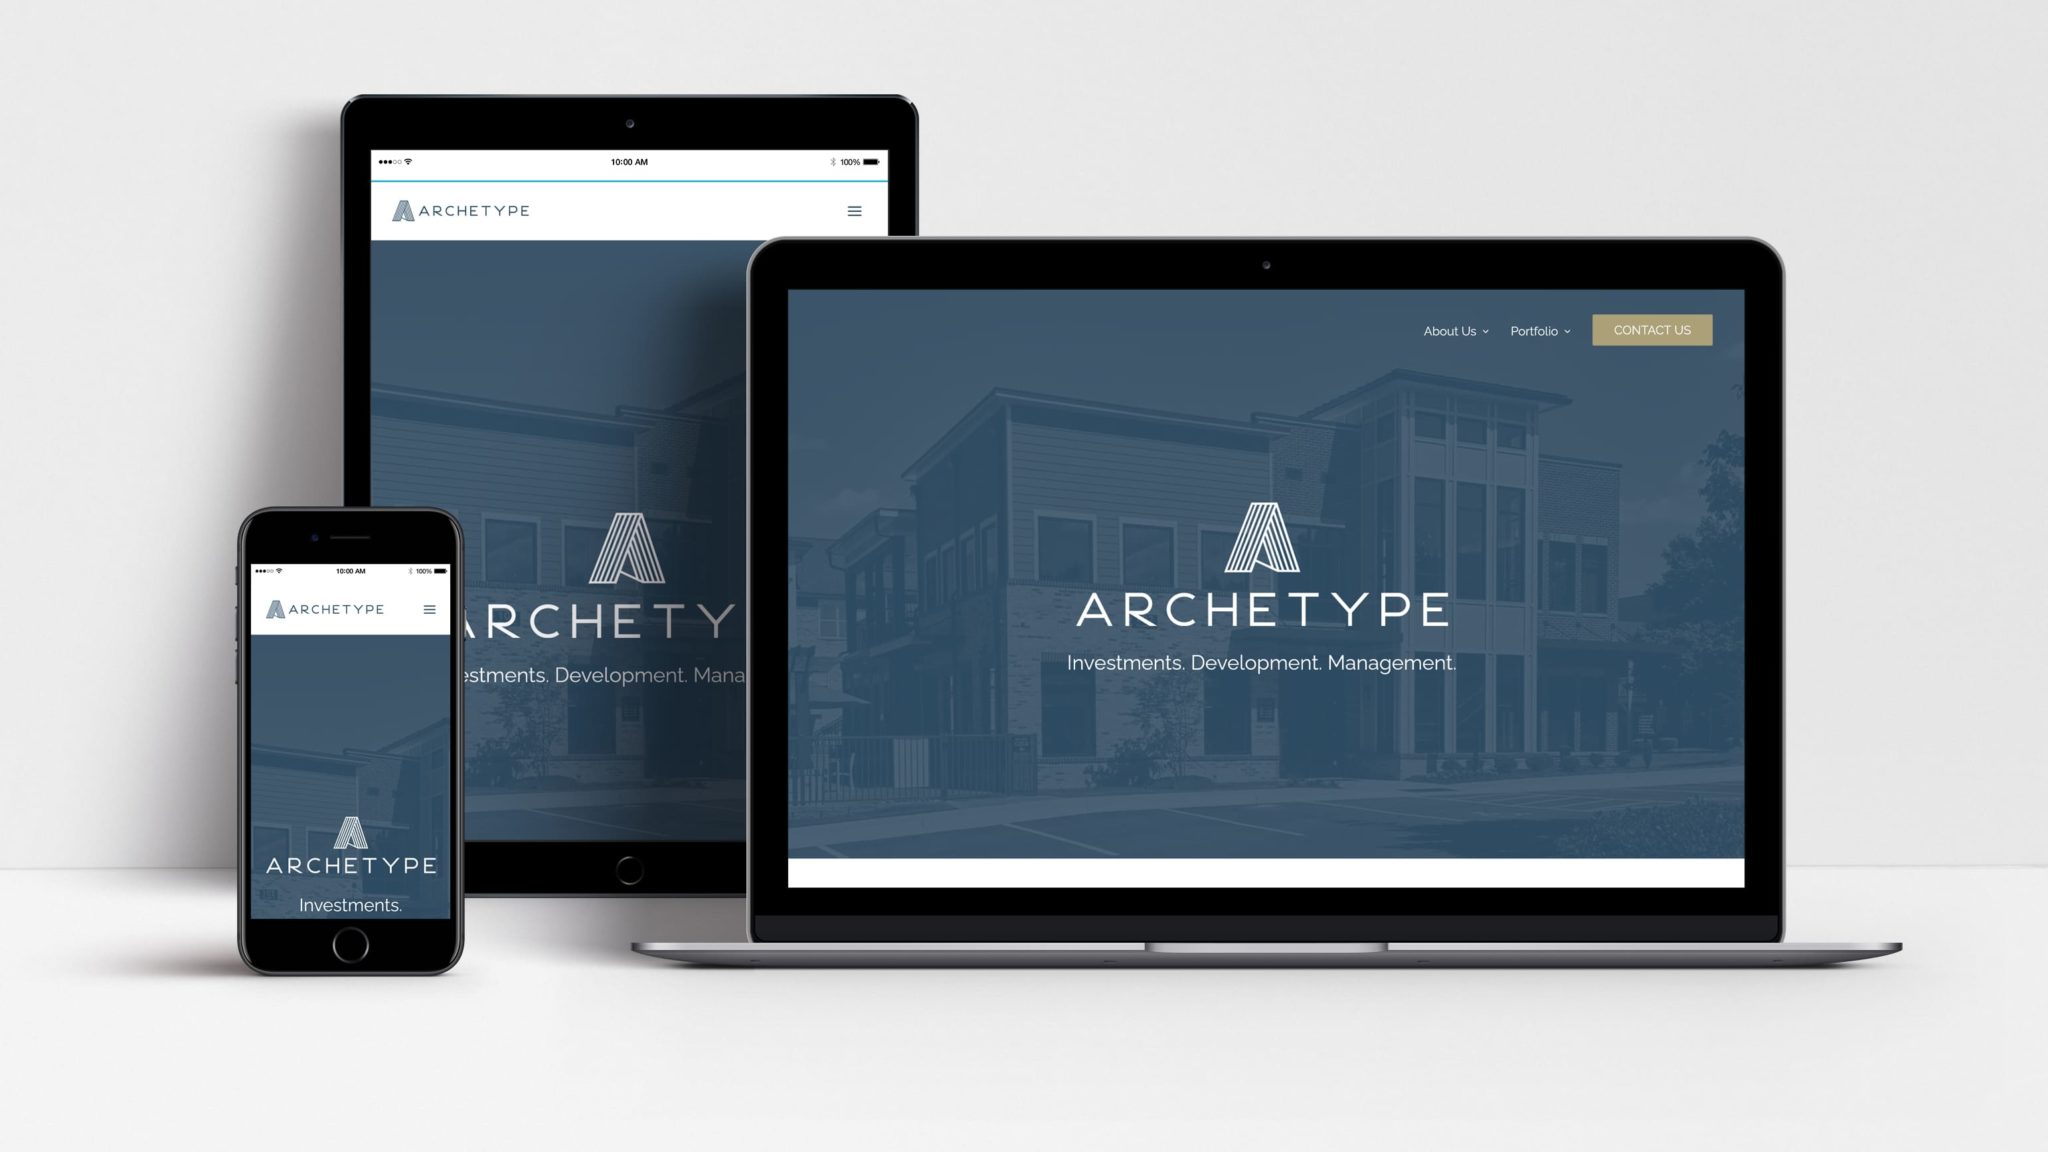 Archetype website shown on laptop, tablet and mobile phone